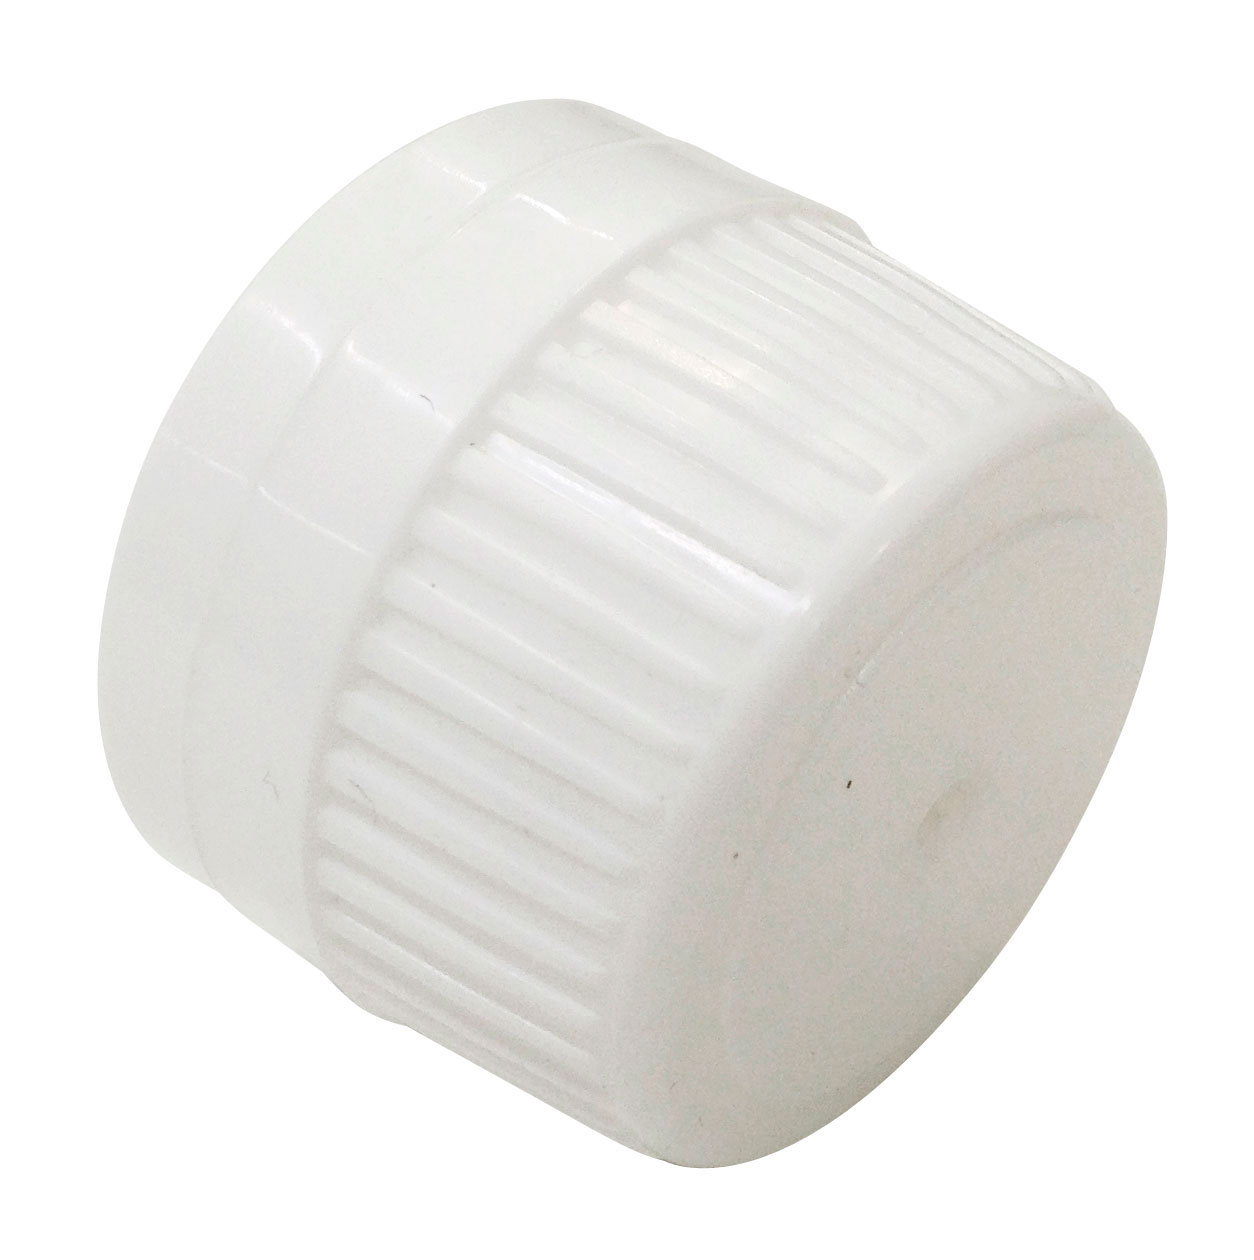 White polypropylene cap without liner and septumless. Economic package.